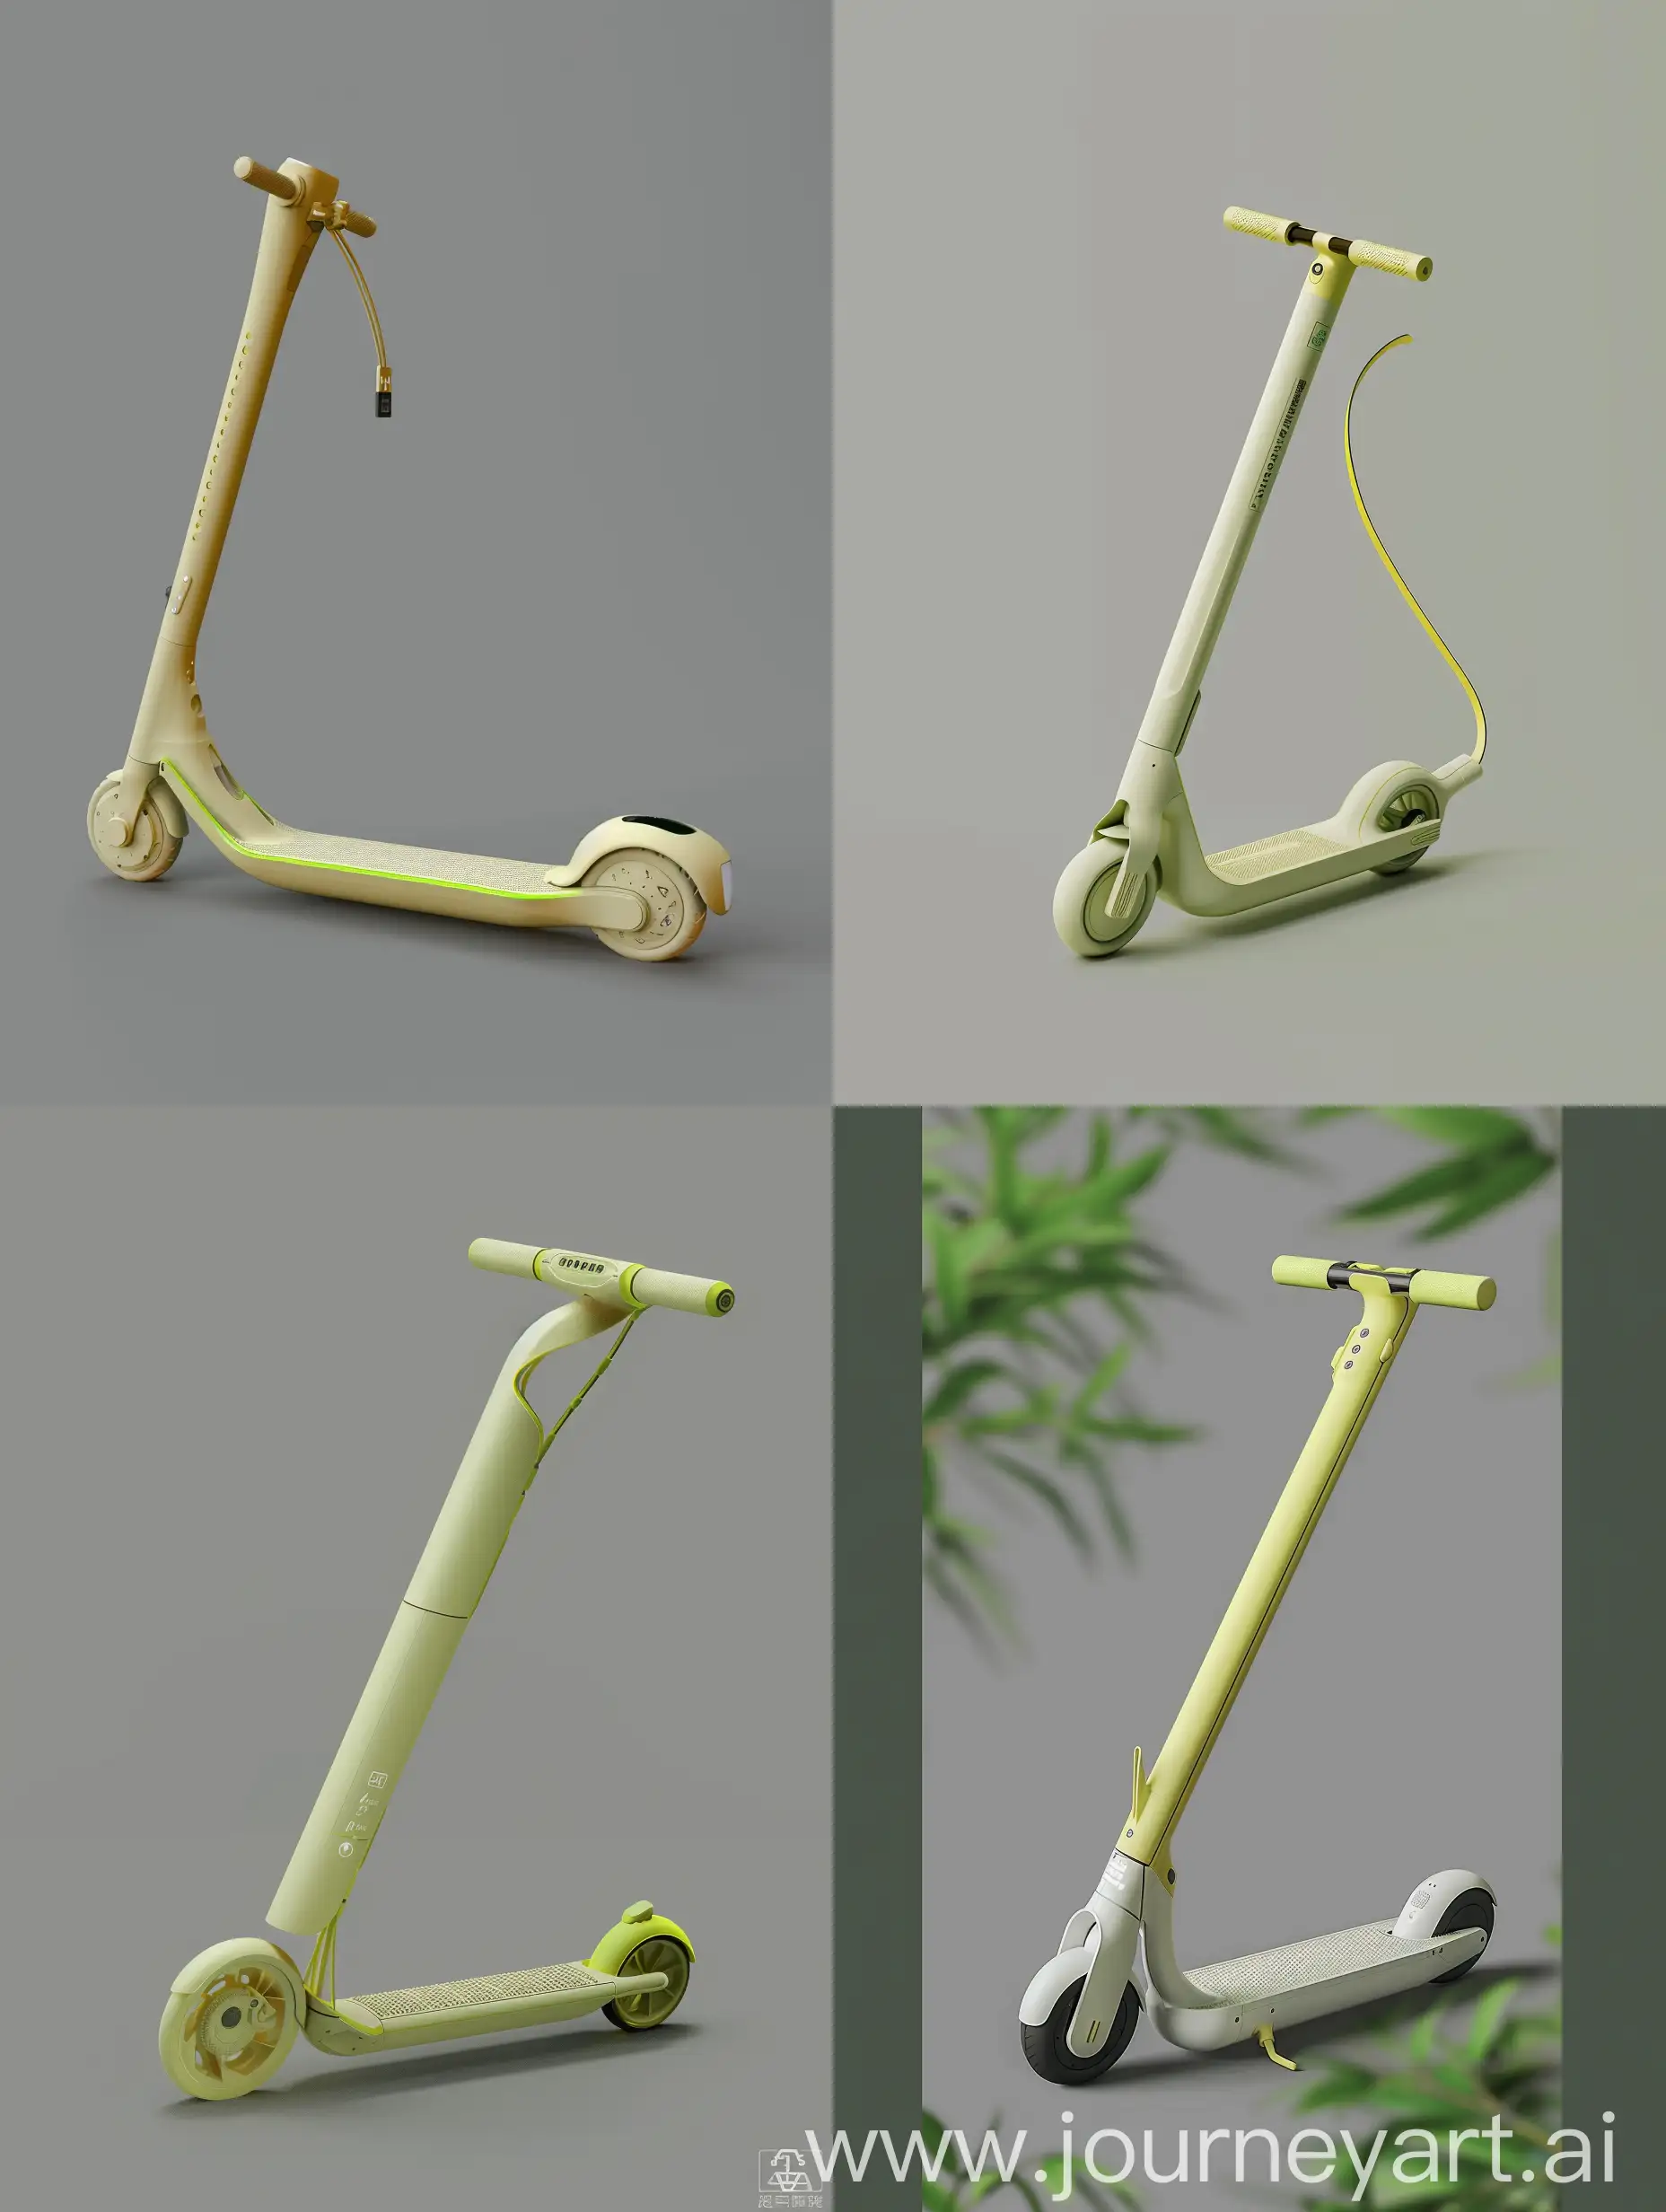 Design a elegance futuristic, foldable eco-friendly electric scooter for young people inspired by the characteristics and symbolism of bamboo. The scooter features sleek, smooth curves with a matte warm white finish and slight transparency, accented with green tones inspired by bamboo. The handle design is minimalistic and curved, inspired by bamboo leaves, with a subtle texture, made from durable composite materials. The footboard is a multi-segmented structure with a textured, non-slip surface, folding neatly into the main body.The scooter folds into a compact cylindrical shape with non-uniform cross-sections mimicking bamboo segments. The wheels are retractable, folding into the body via a spring-loaded and gear system inspired by the retraction mechanisms of turtle limbs, ensuring a smooth, unified form. The handles fold inward along precise hinge lines, inspired by the folding of insect wings and Mimosa pudica leaves, using spring-loaded or magnetic hinges.The scooter includes solar panels for sustainable charging and a kinetic energy recovery system. A small, integrated display on the handlebar shows the map, path, charge level, and weather conditions. The design emphasizes both form and function, suitable for urban commuting, highlighting eco-friendliness and innovation. Materials used are lightweight composites with a matte warm white and slightly transparent finish, accented with green tones. The handlebar features an integrated power button and a folding/unfolding button for ease of use, with the LED display centered for clear visibility. The overall design is clean, minimalistic, and inspired by the natural elegance and segmented structure of bamboo. The scooter also features customizable LED lights and mobile app integration for personalization and tracking of usage and environmental impact.